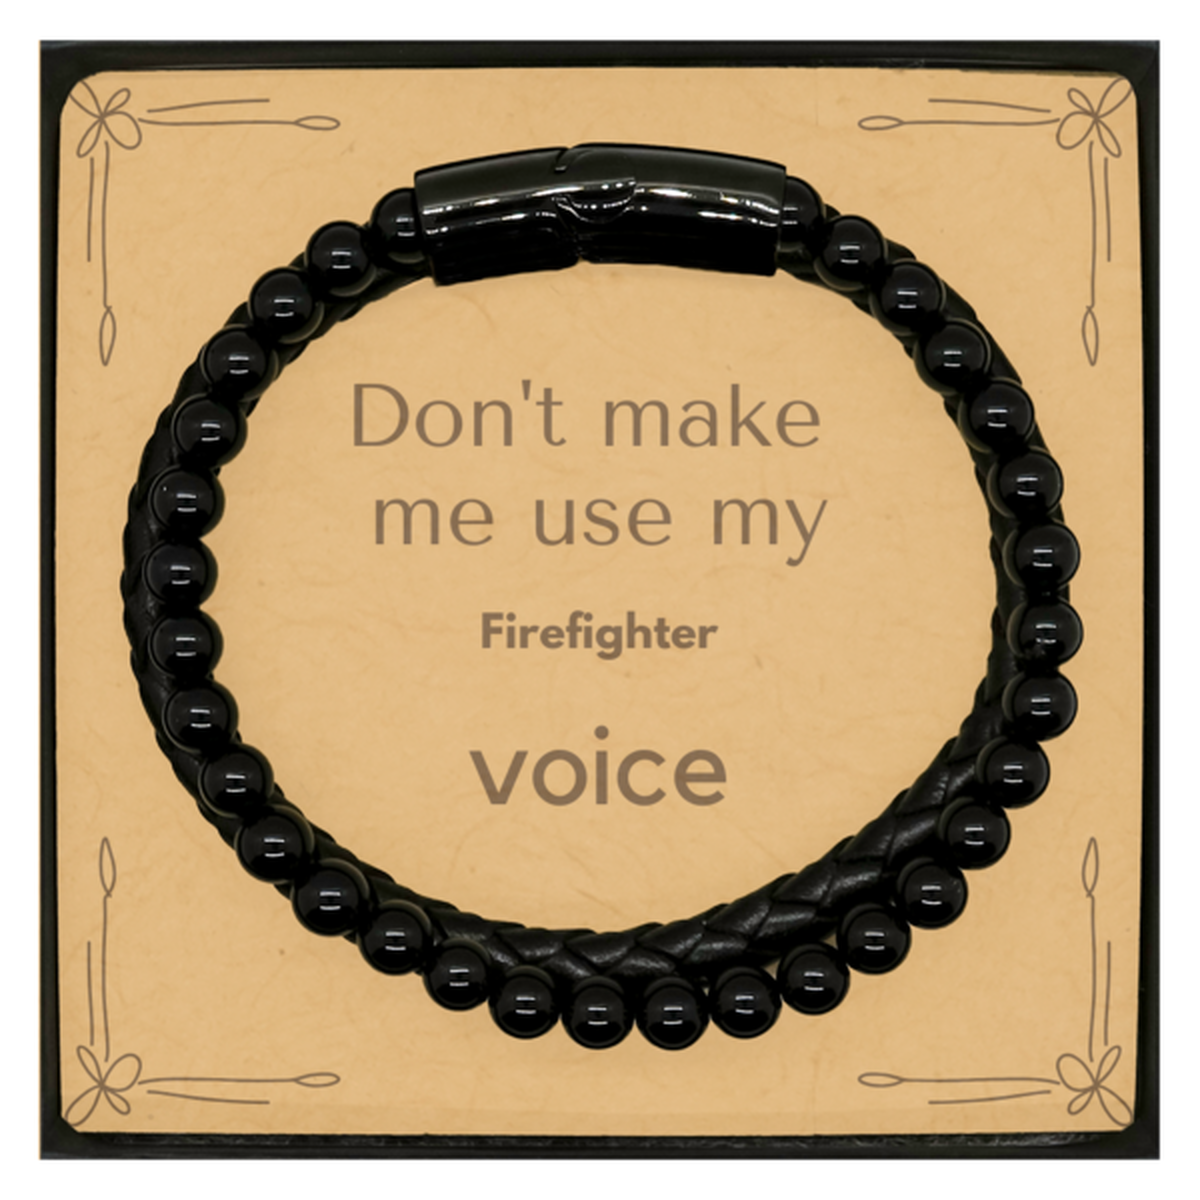 Don't make me use my Firefighter voice, Sarcasm Firefighter Card Gifts, Christmas Firefighter Stone Leather Bracelets Birthday Unique Gifts For Firefighter Coworkers, Men, Women, Colleague, Friends